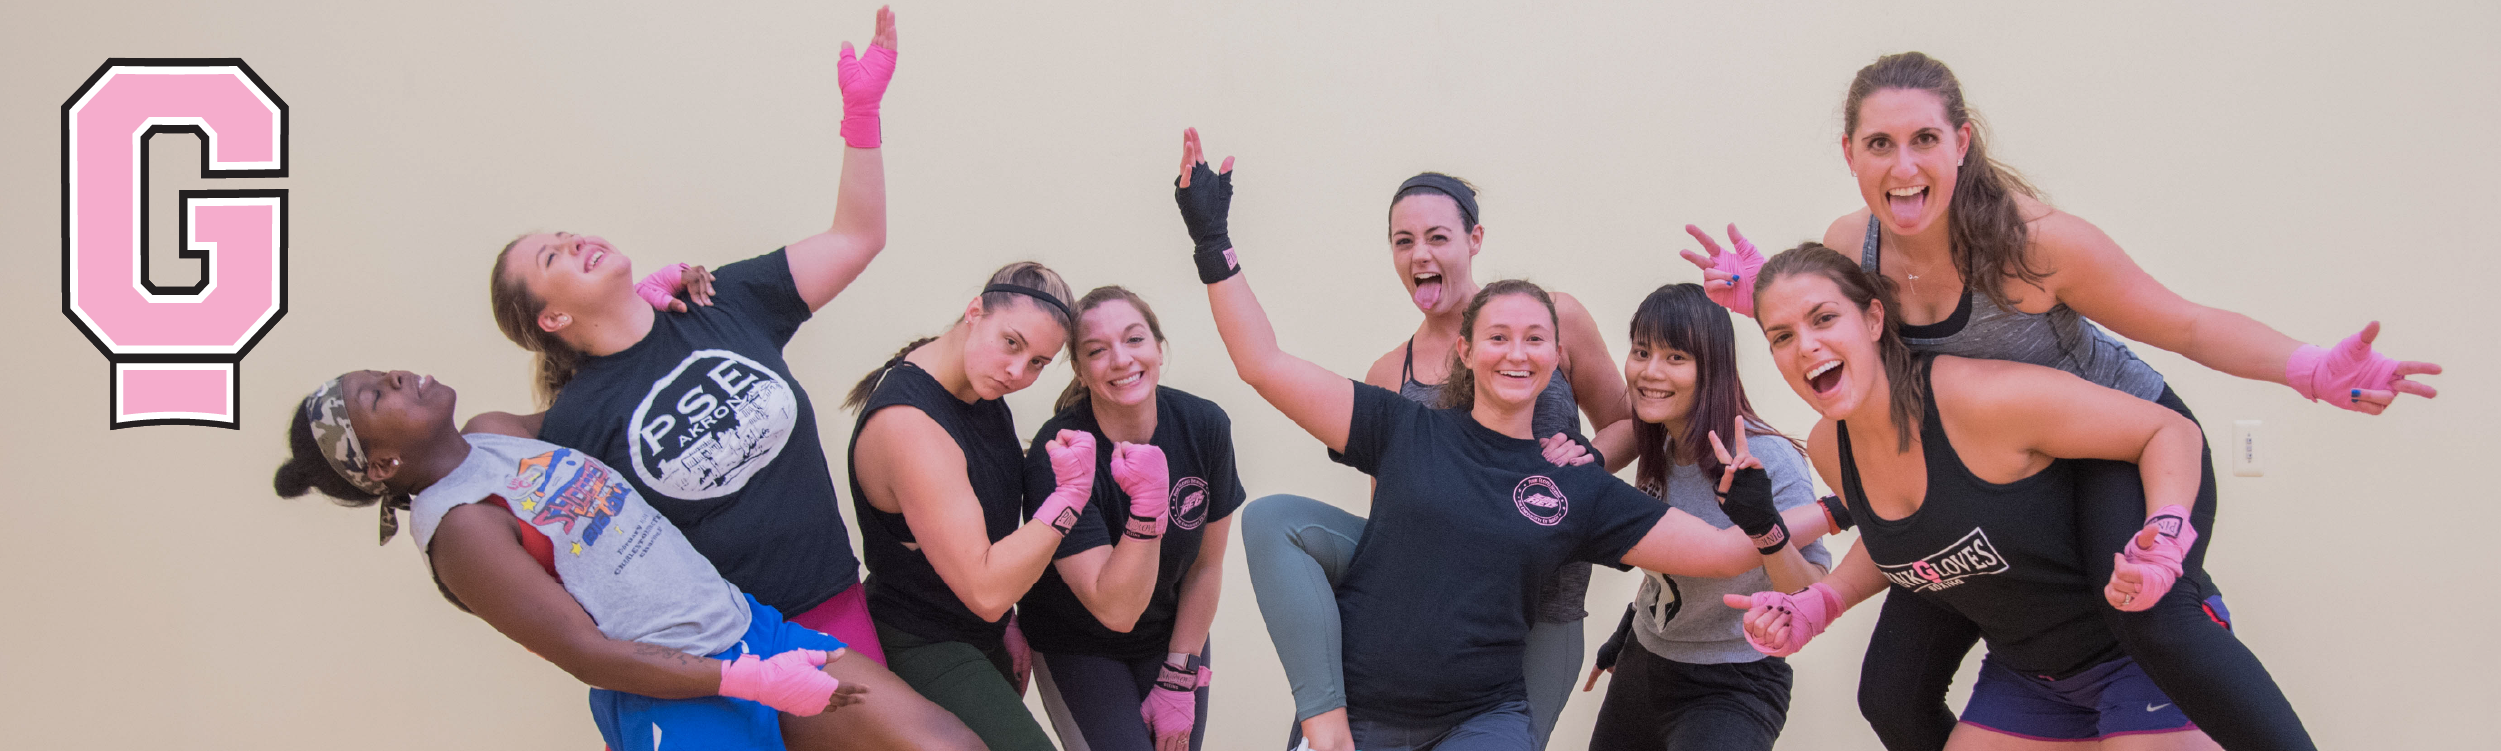 Women of Pink Gloves Boxing